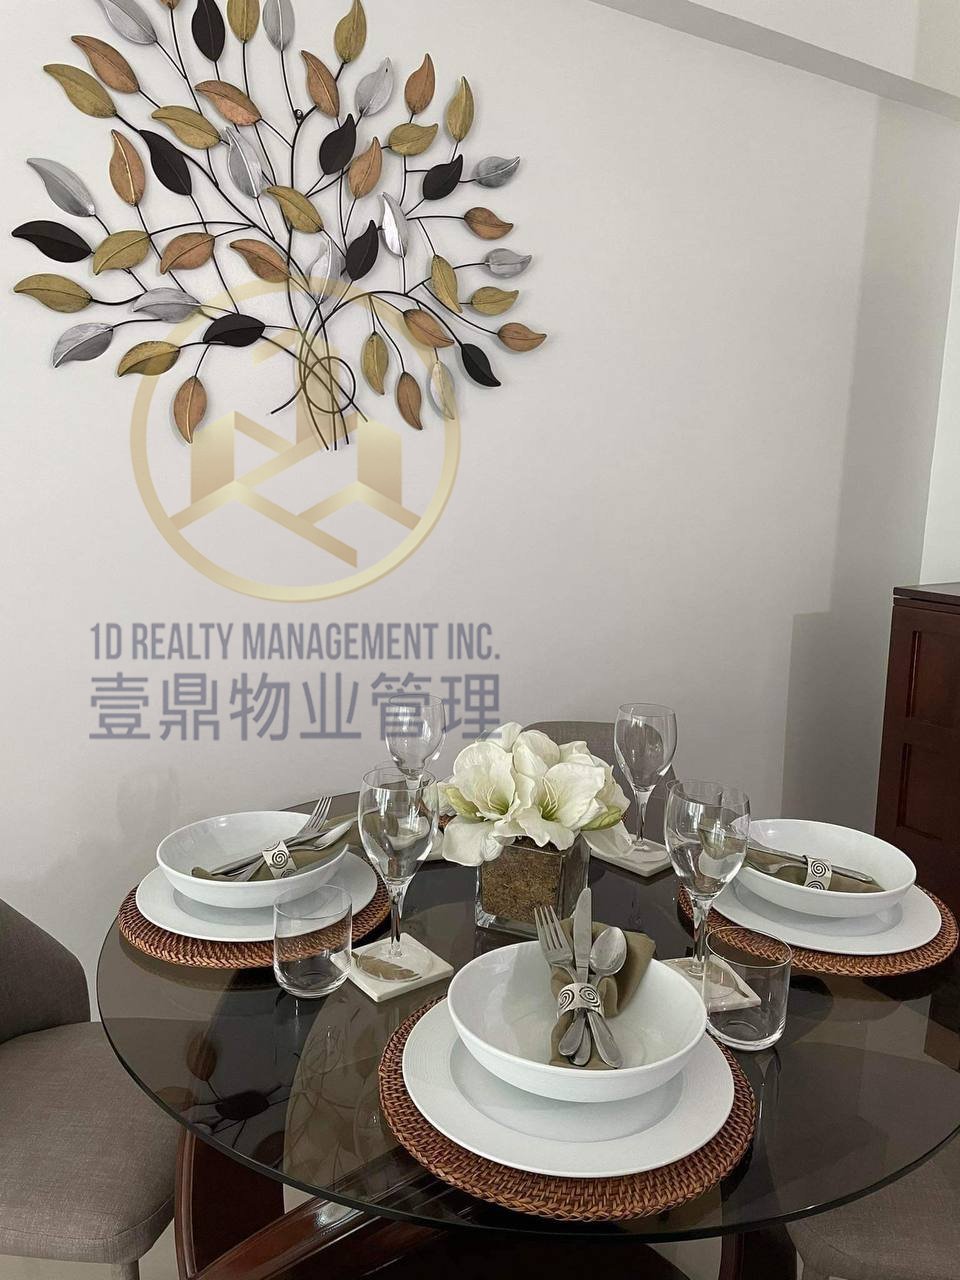 Bristol at Parkway Place - Filinvest City Alabang, Muntinlupa - FOR SALE